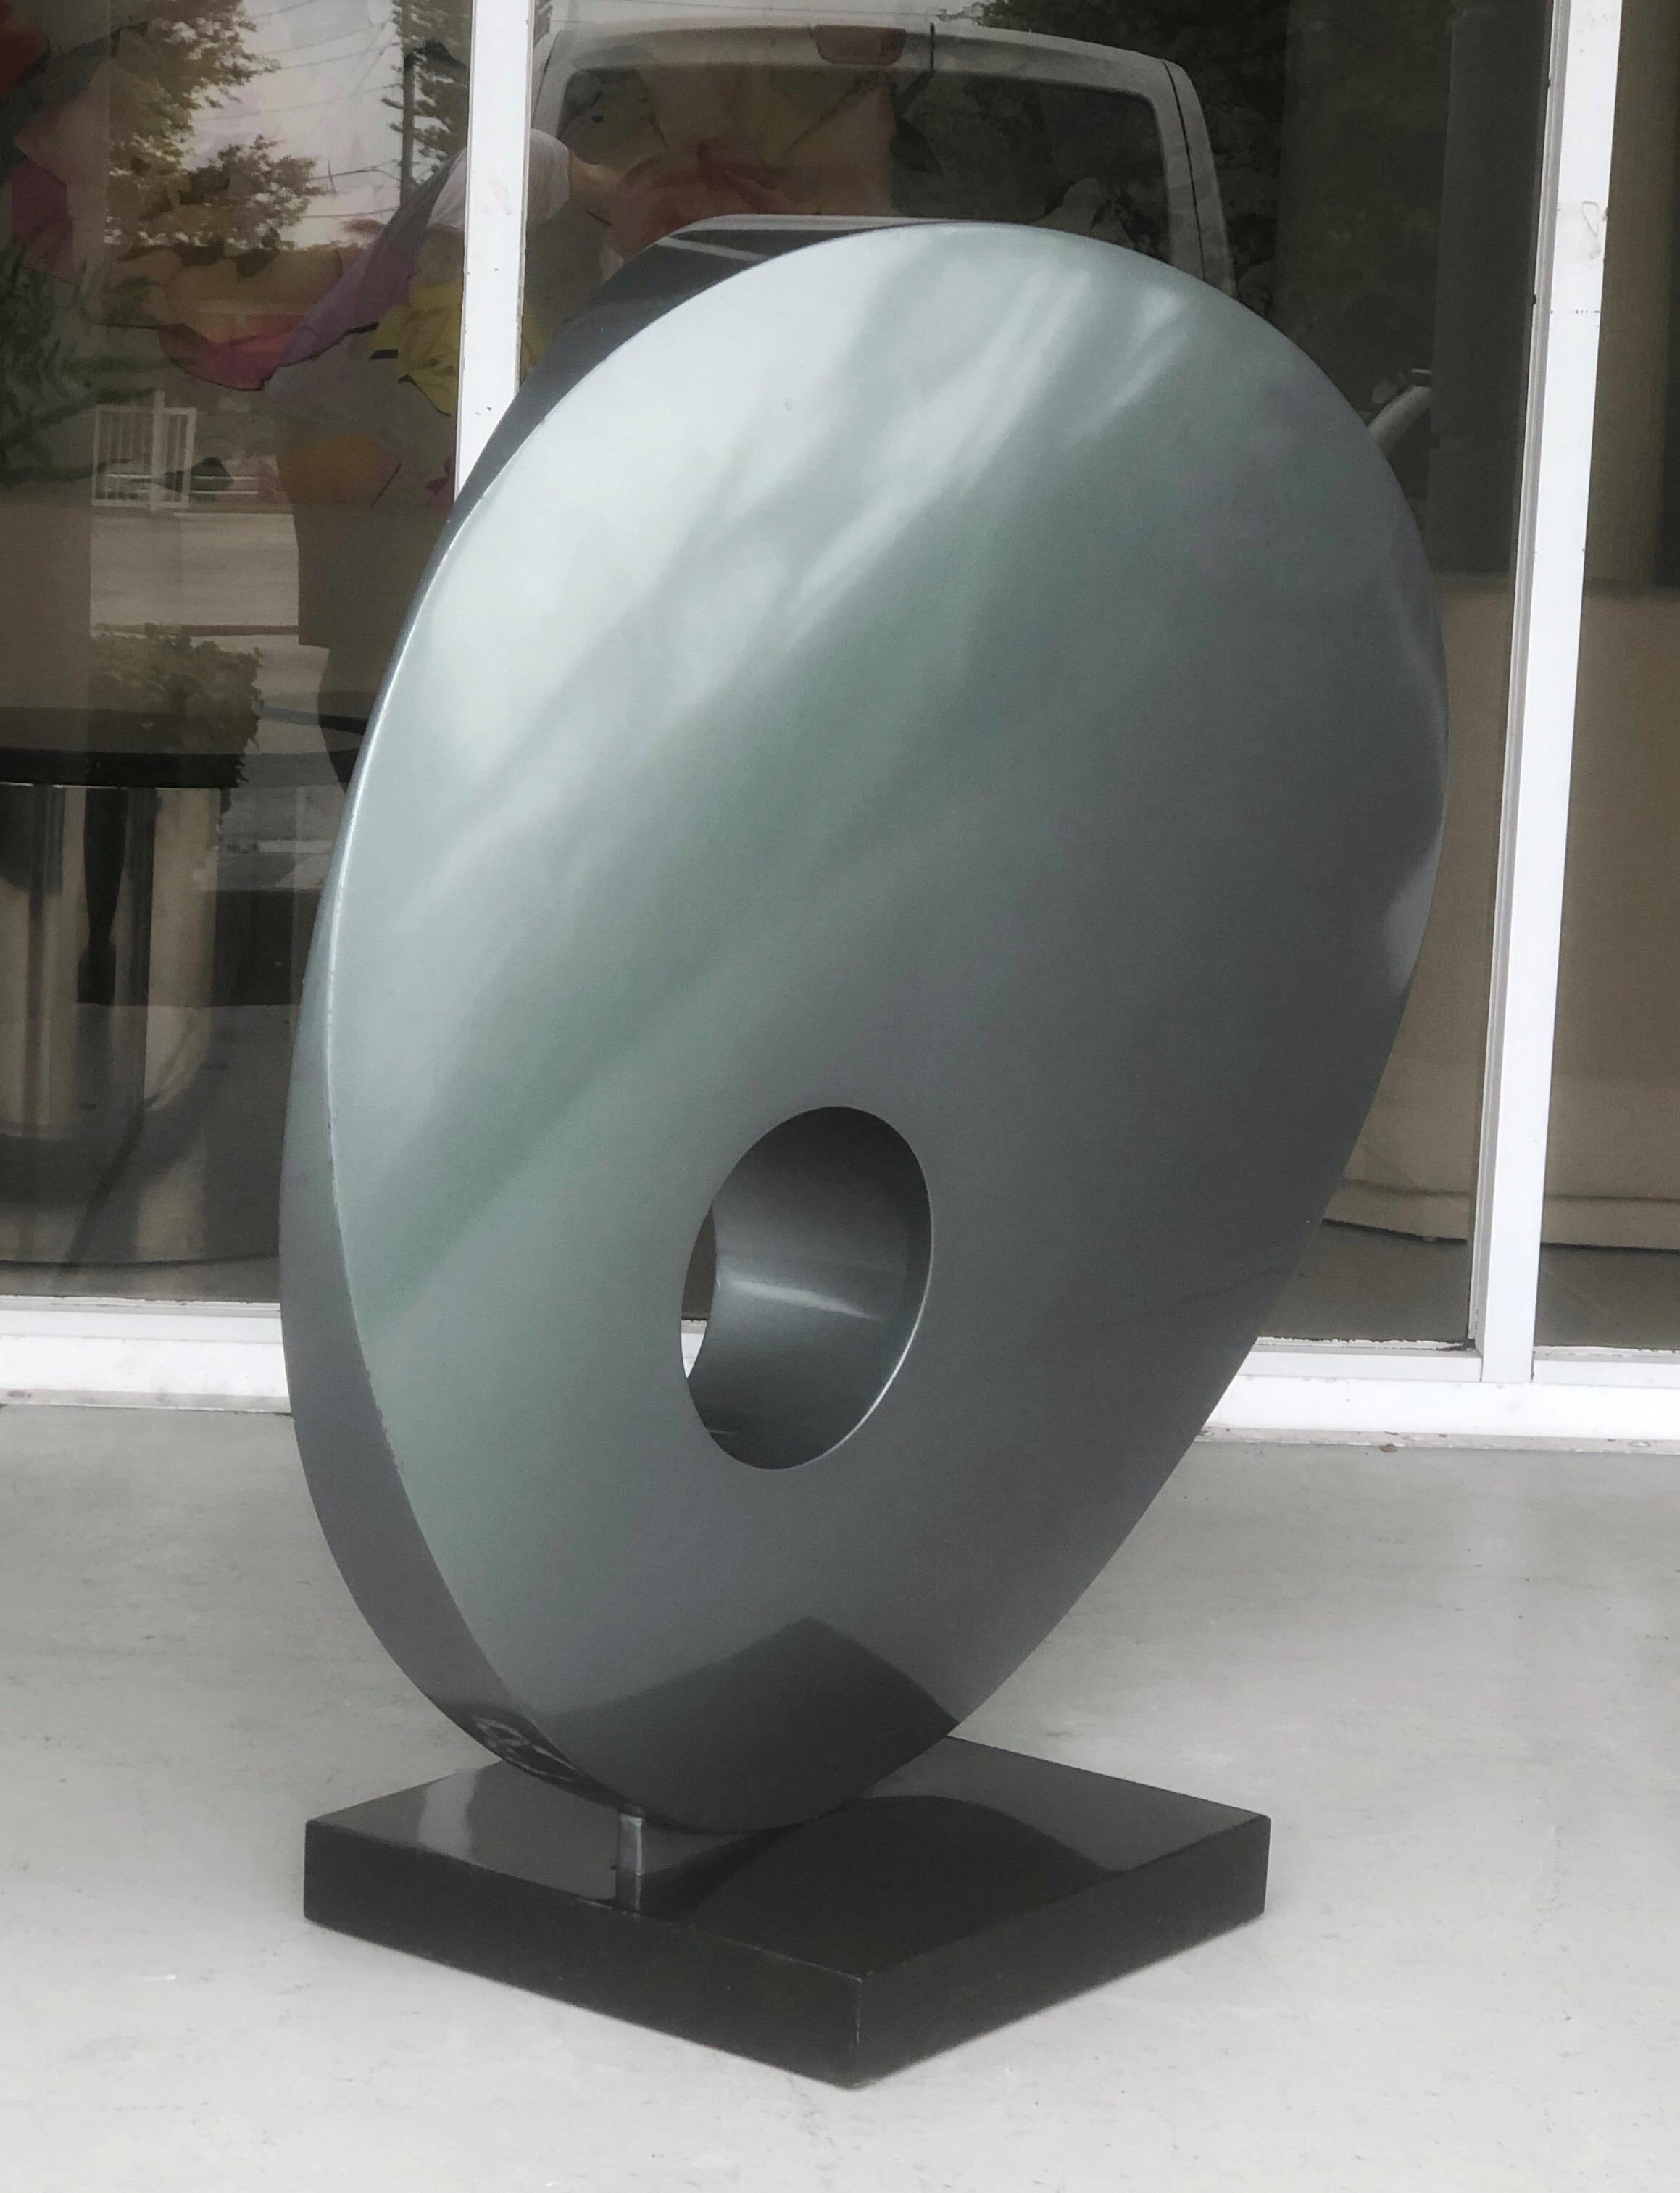 A very large sculpture. Suitable for indoors as well as outdoors. A very clean abstract design, round in shape, it is wider on one side becomes thinner on the other side, it also has a see through round area a la Barbara Hepworth. It is mounted on